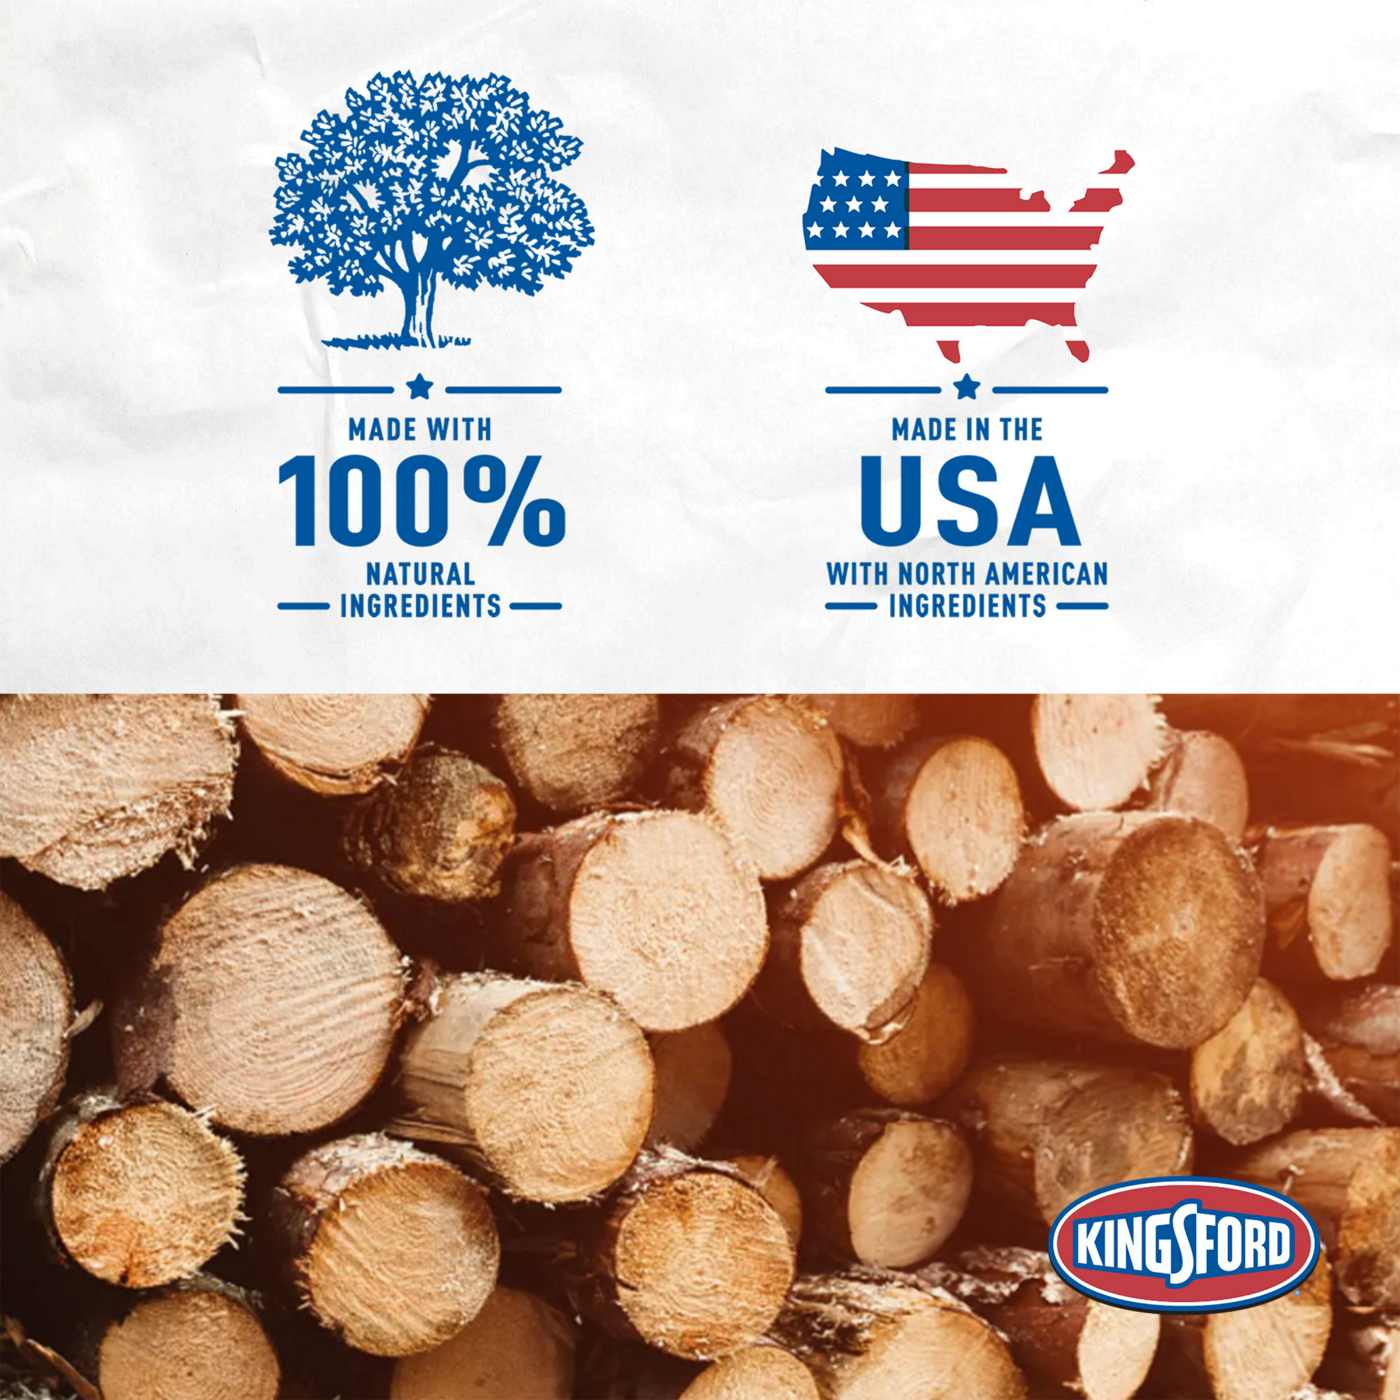 Kingsford Charcoal Briquettes with Signature Mesquite, BBQ Charcoal for Grilling; image 3 of 11